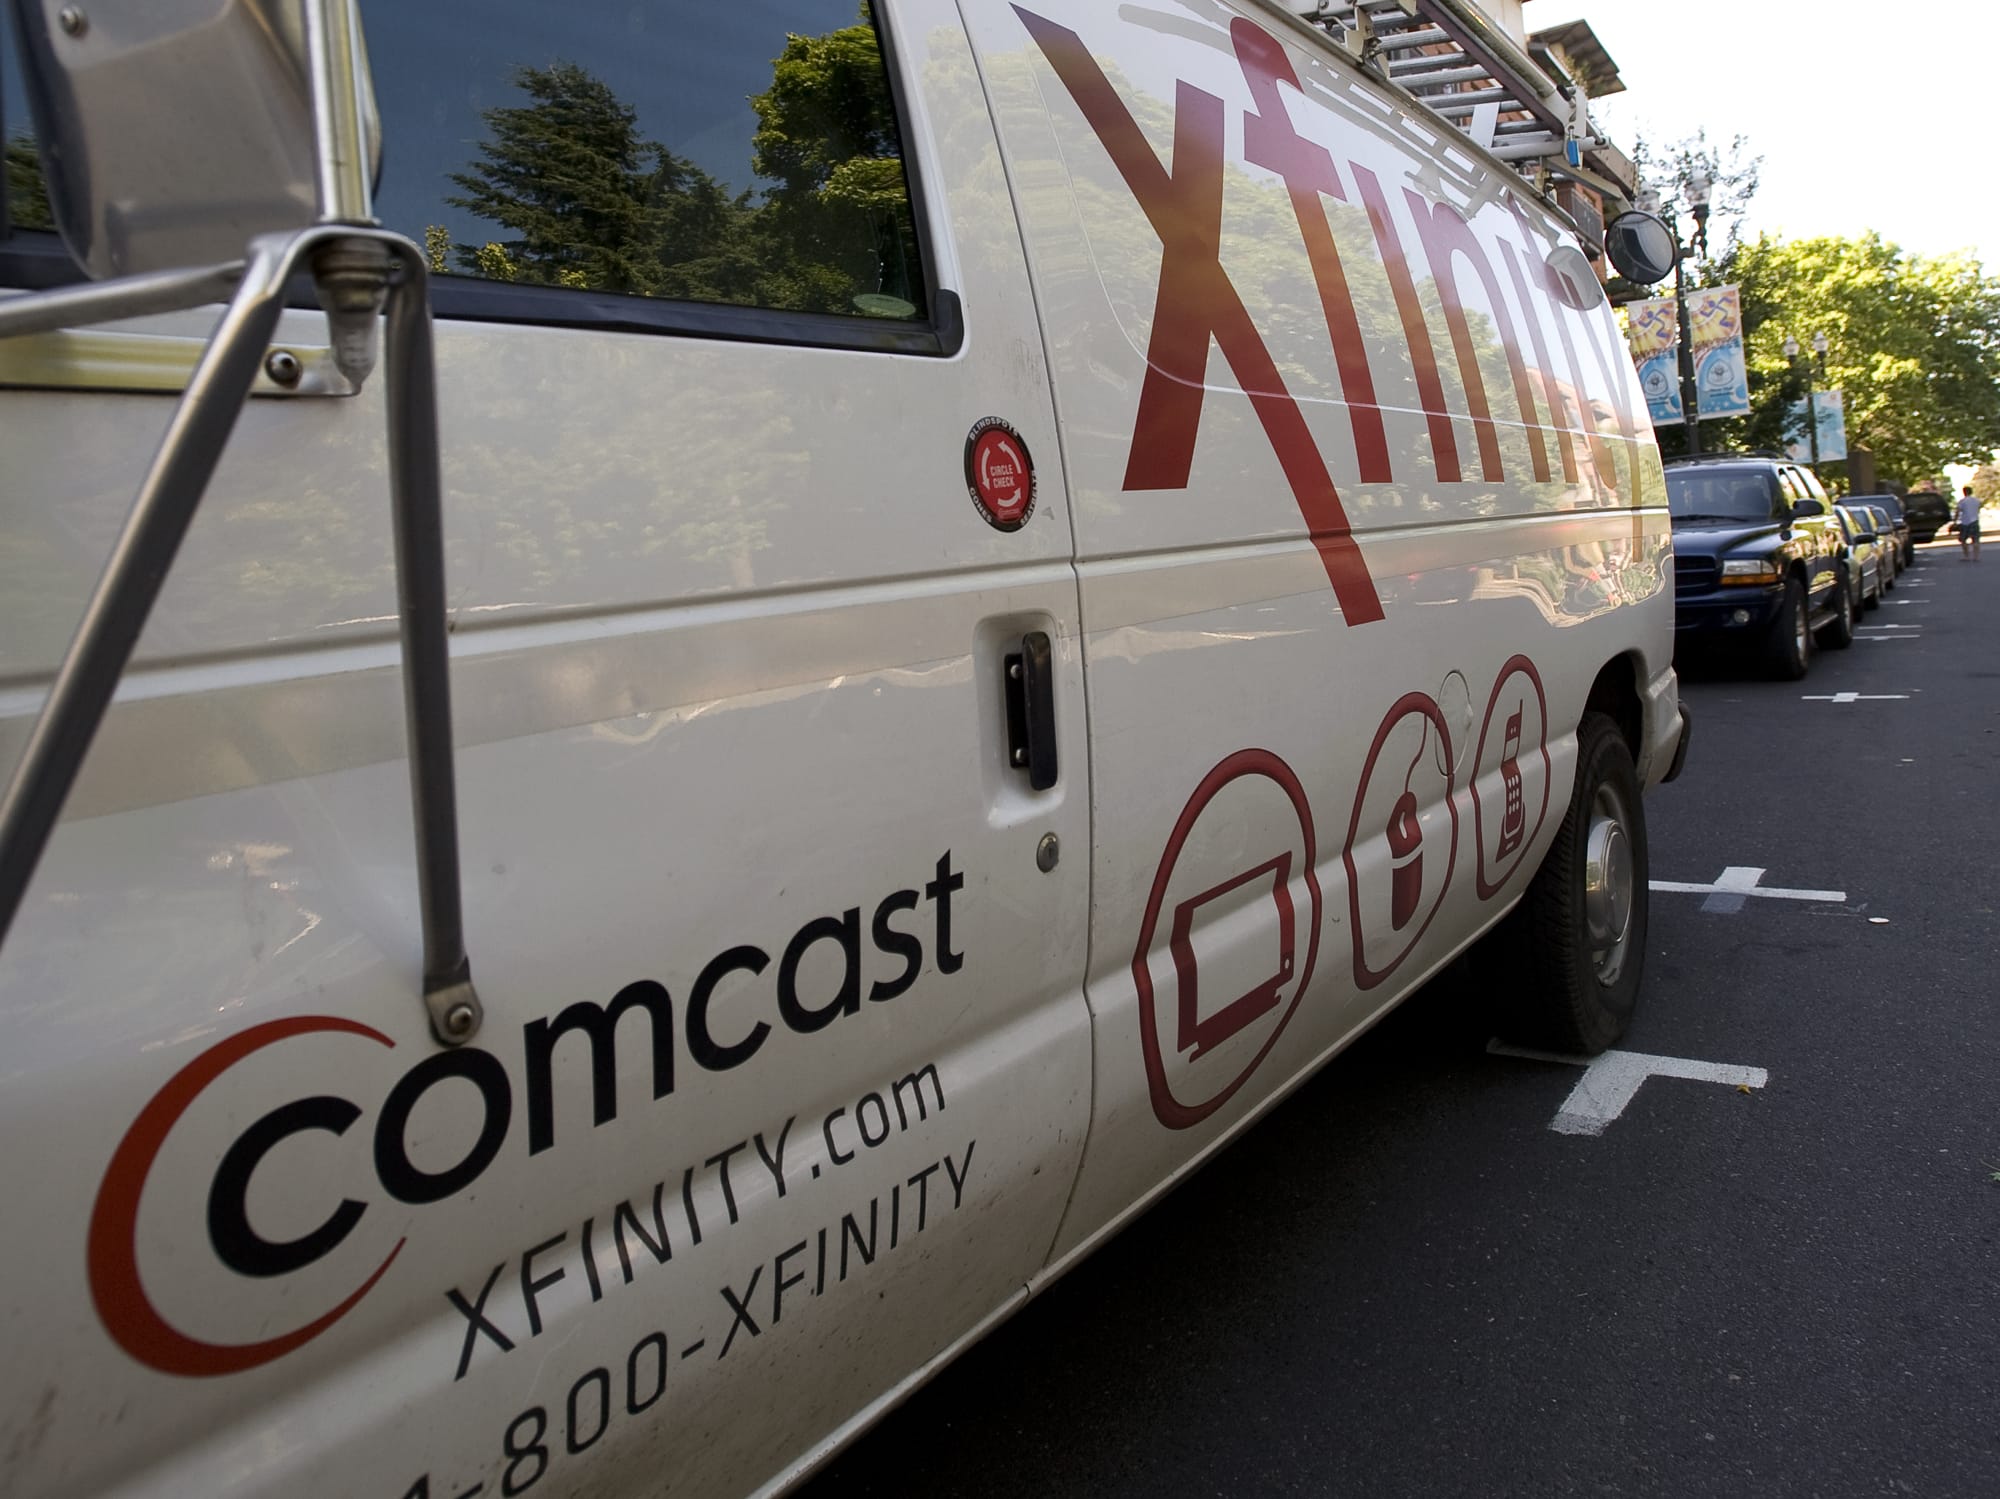 That 4.3 percent fee increase from Comcast includes a hike of $2.25 to the basic services fee, which will rise to $3.75 per month.